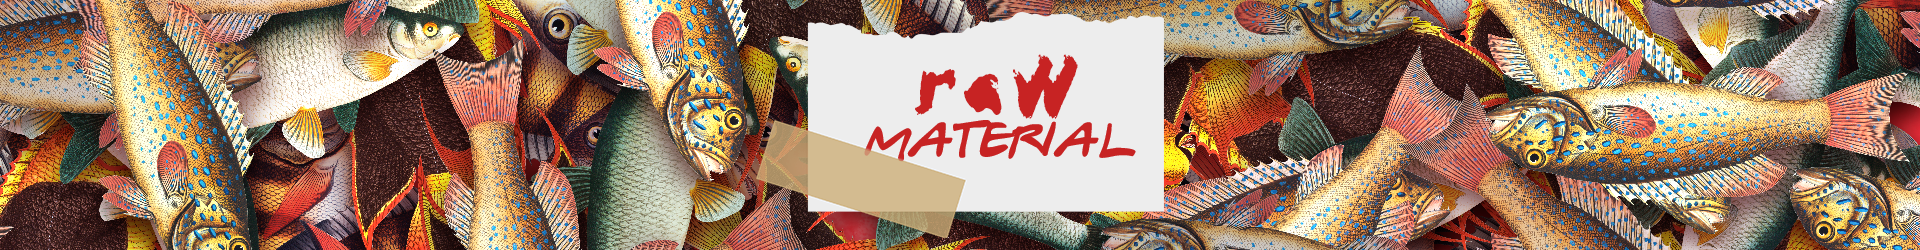 Raw Material banner